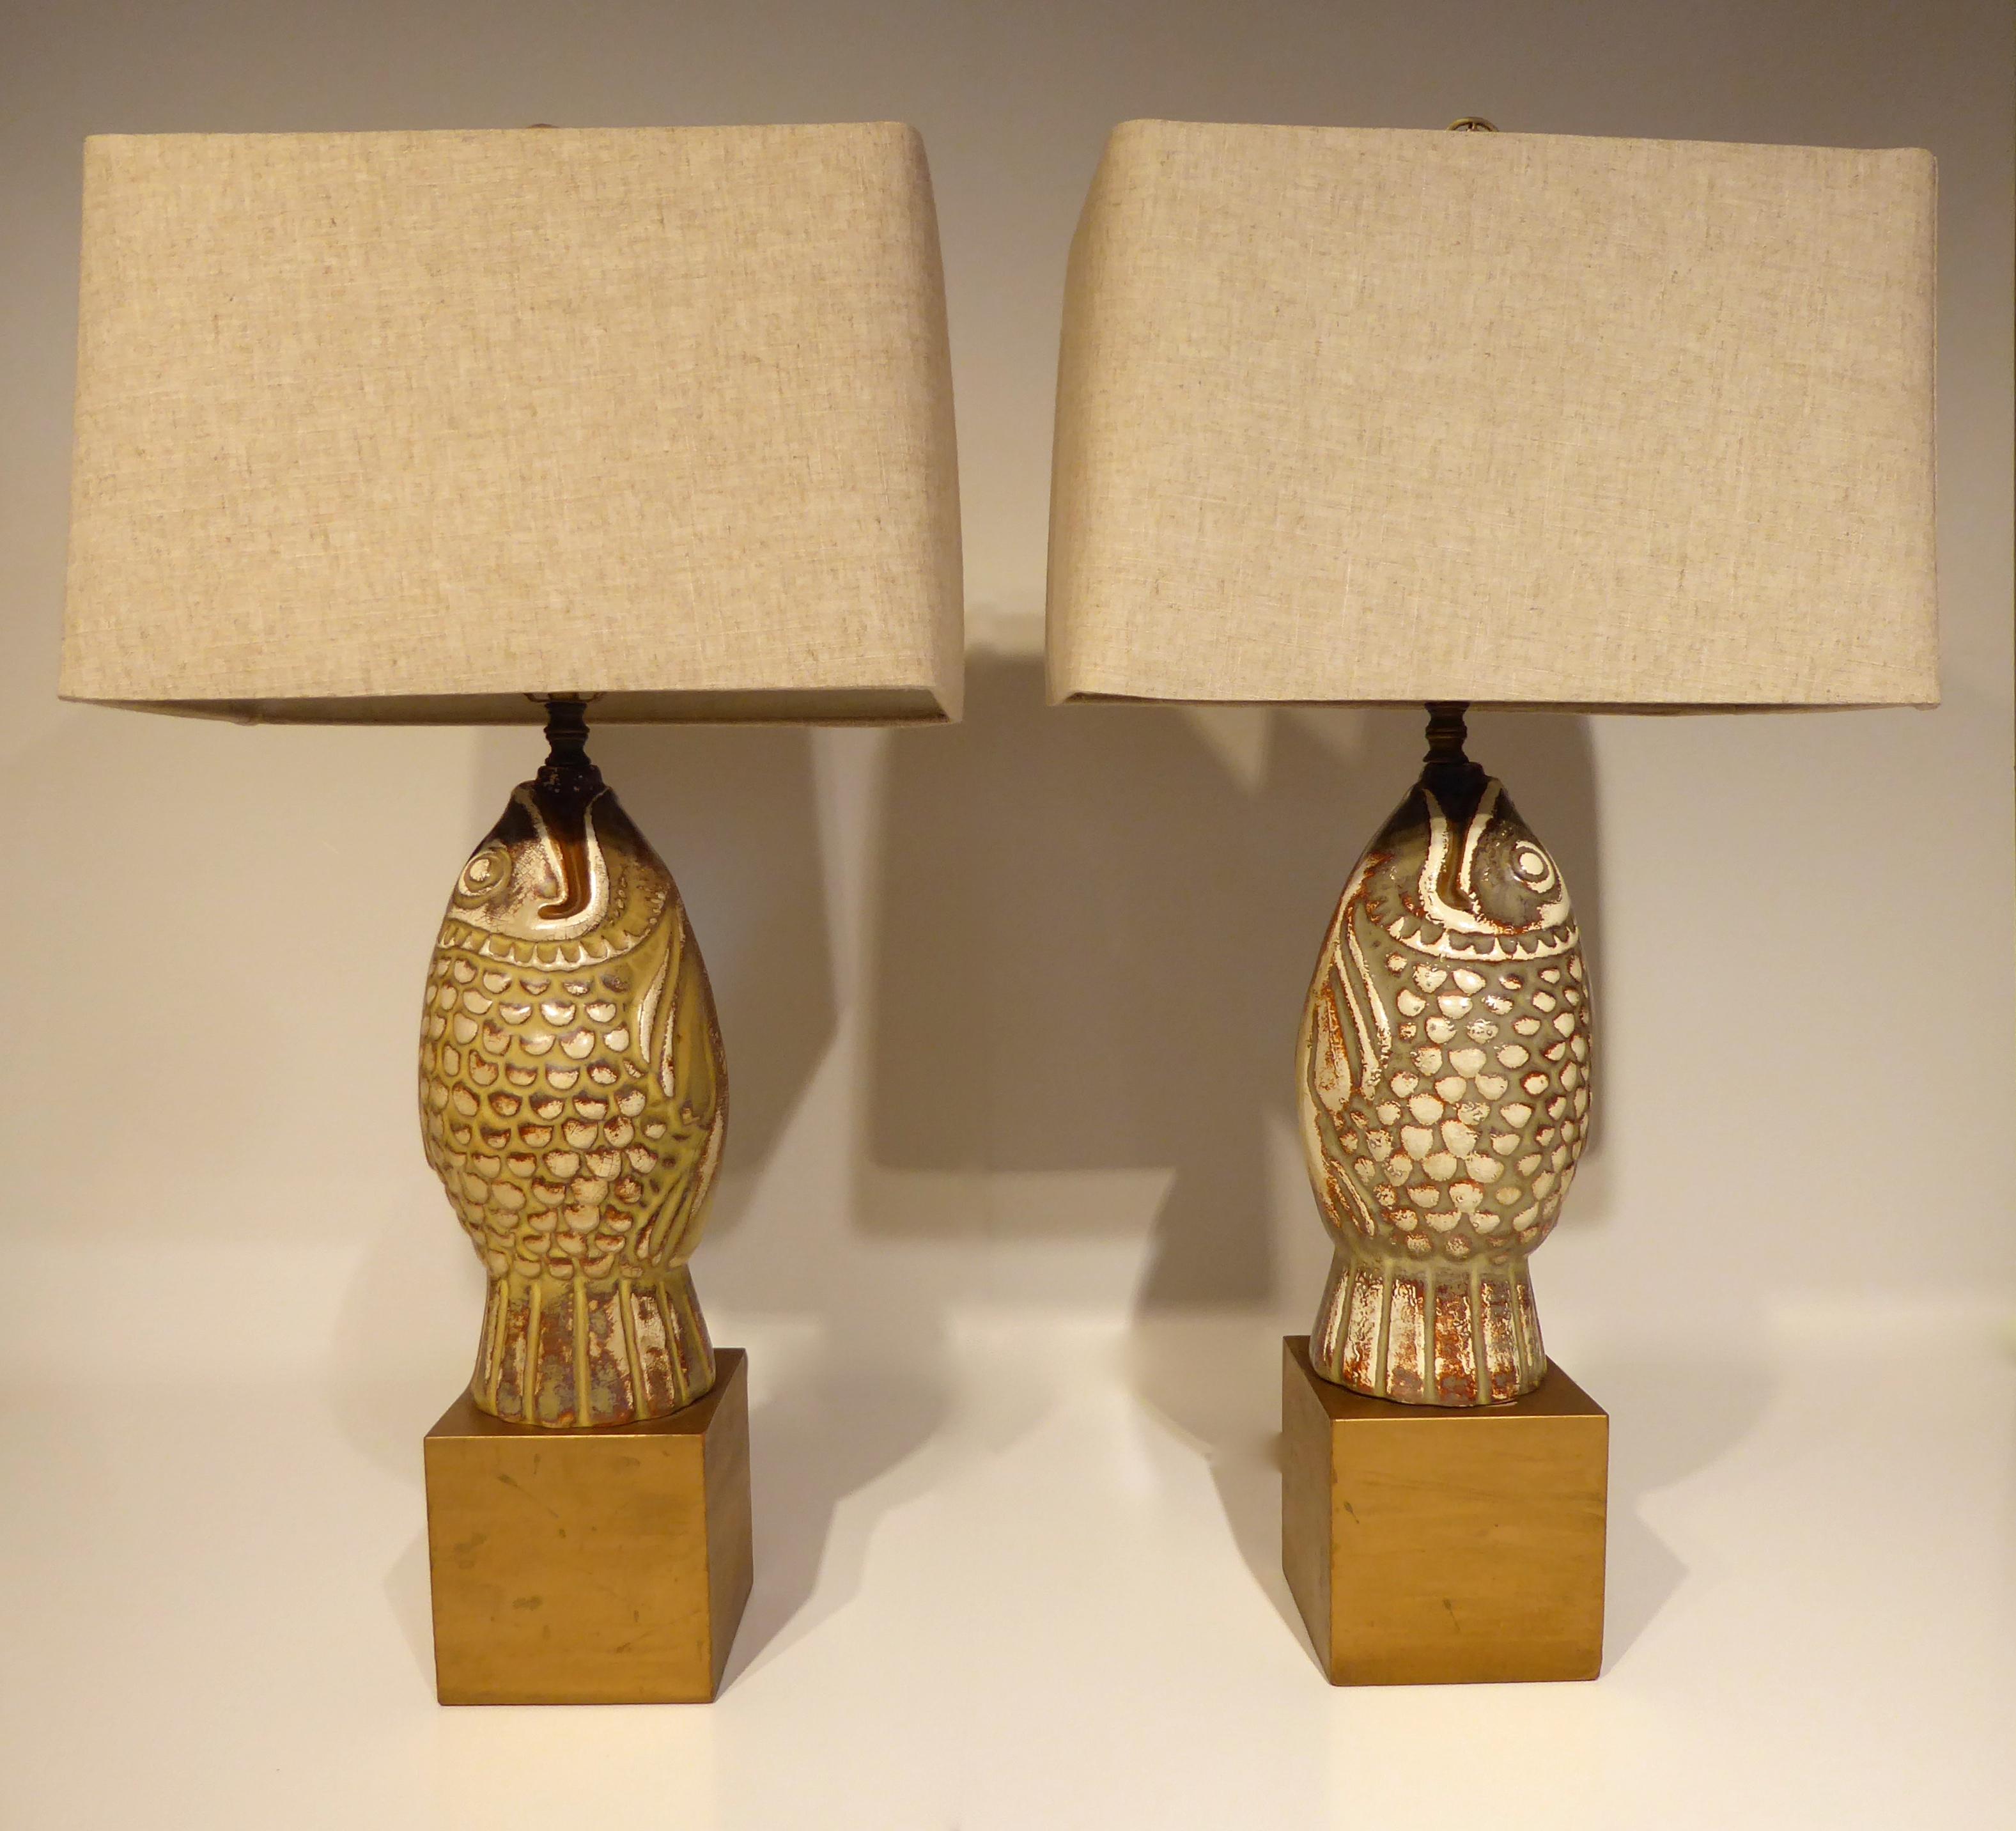 A pair of stylized ceramic Koi figures, mounted as lamps on gold painted bases, circa 1960s. The pair of Koi lamps were custom made, with the figures situated so that they are opposing (face each other). The country of origin on the ceramic parts is